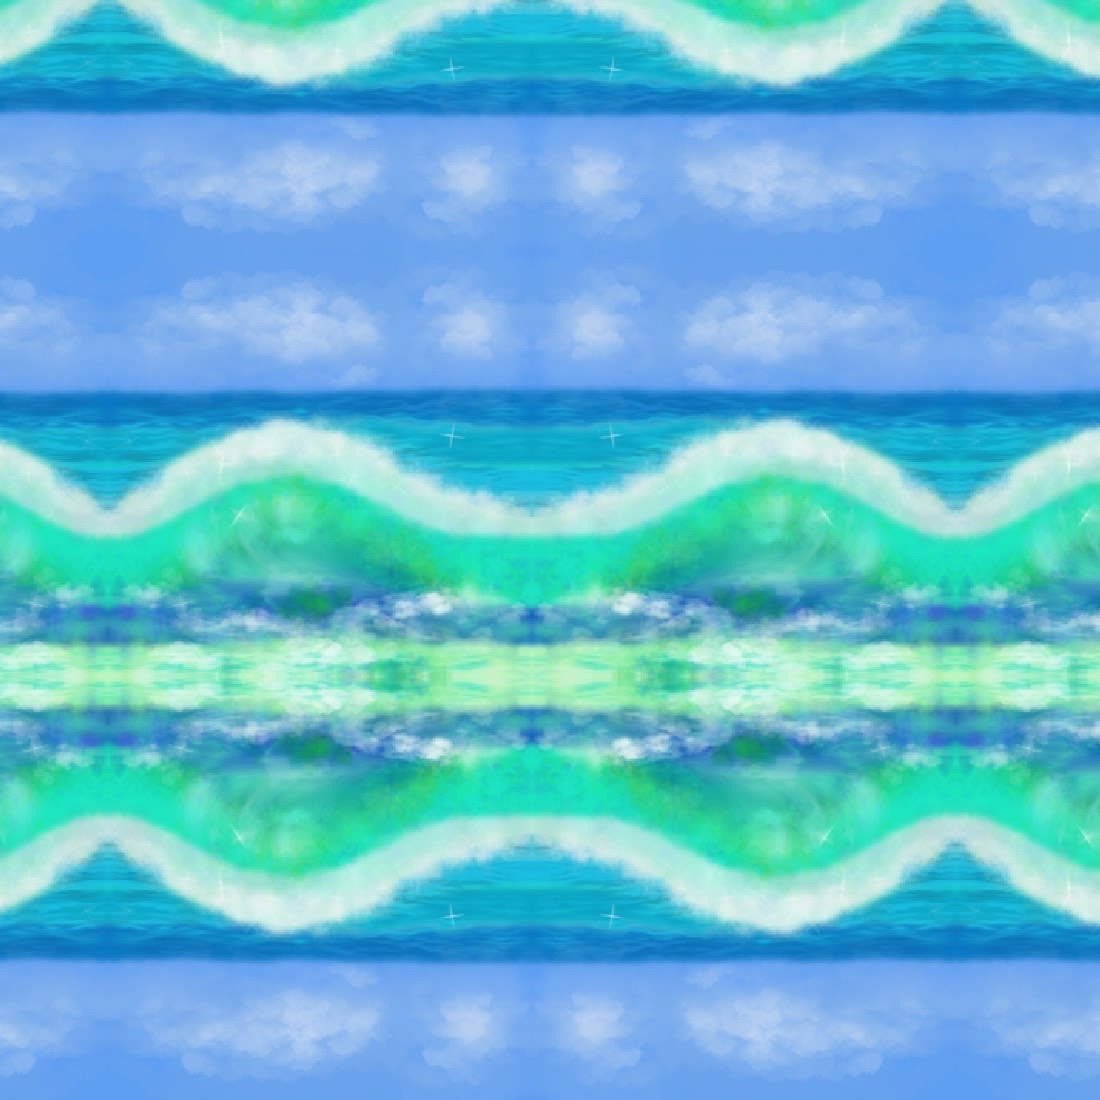 Sea pattern preview image.